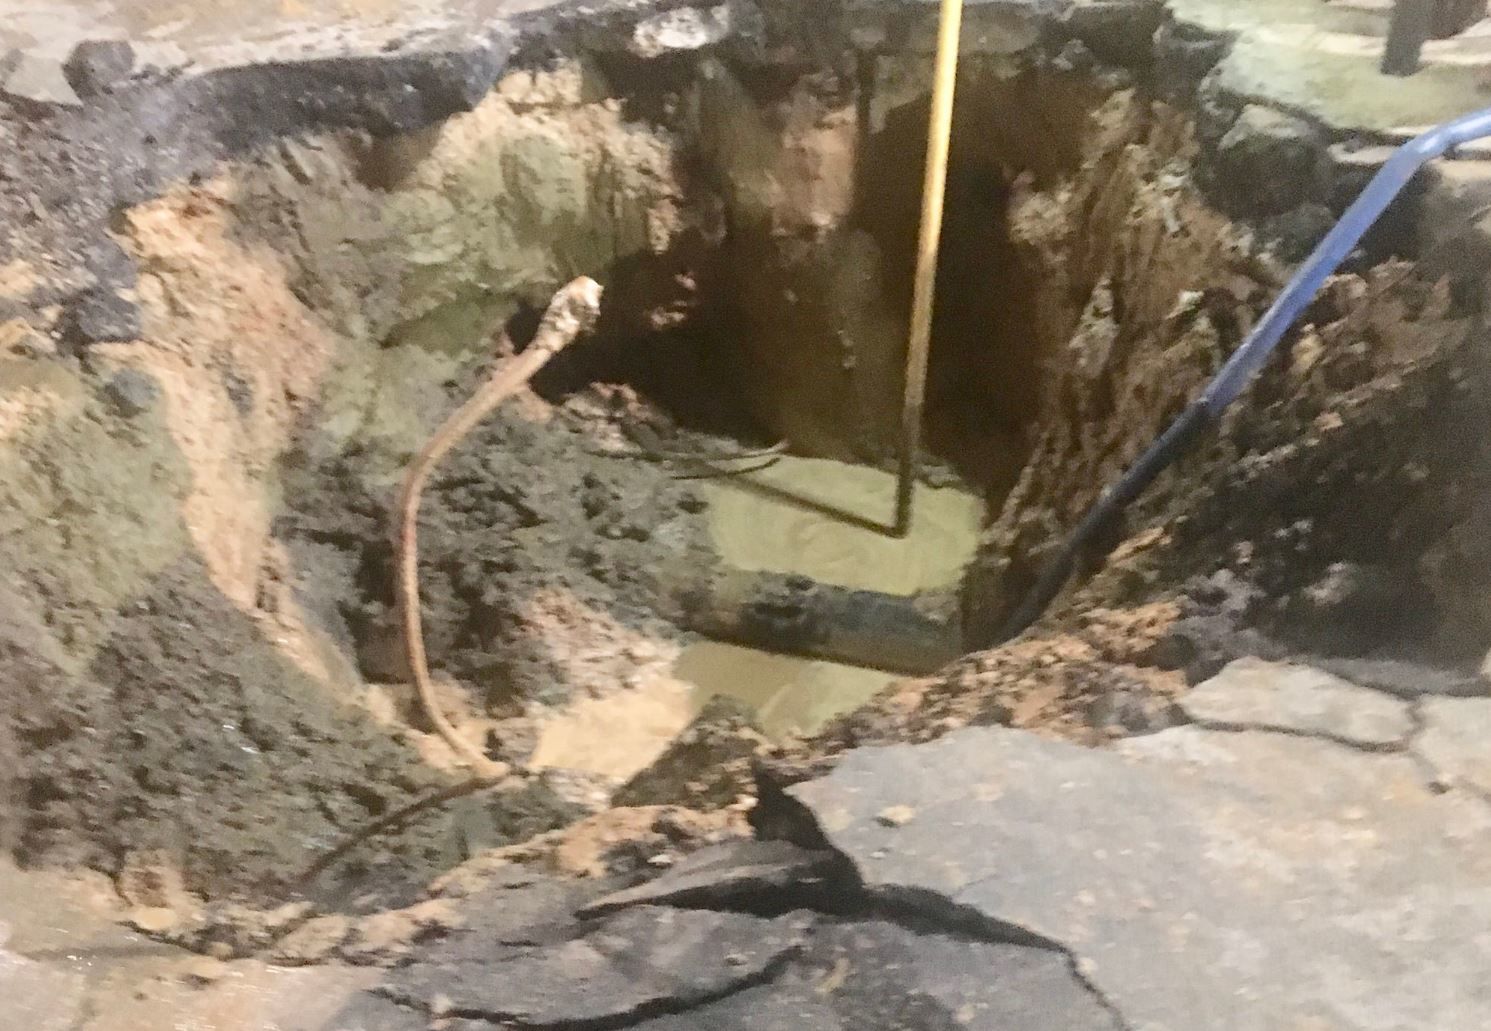 WSSC says repairs are underway after a water main break in Montgomery County, Maryland, on June 6, 2019. (Courtesy WSSC)